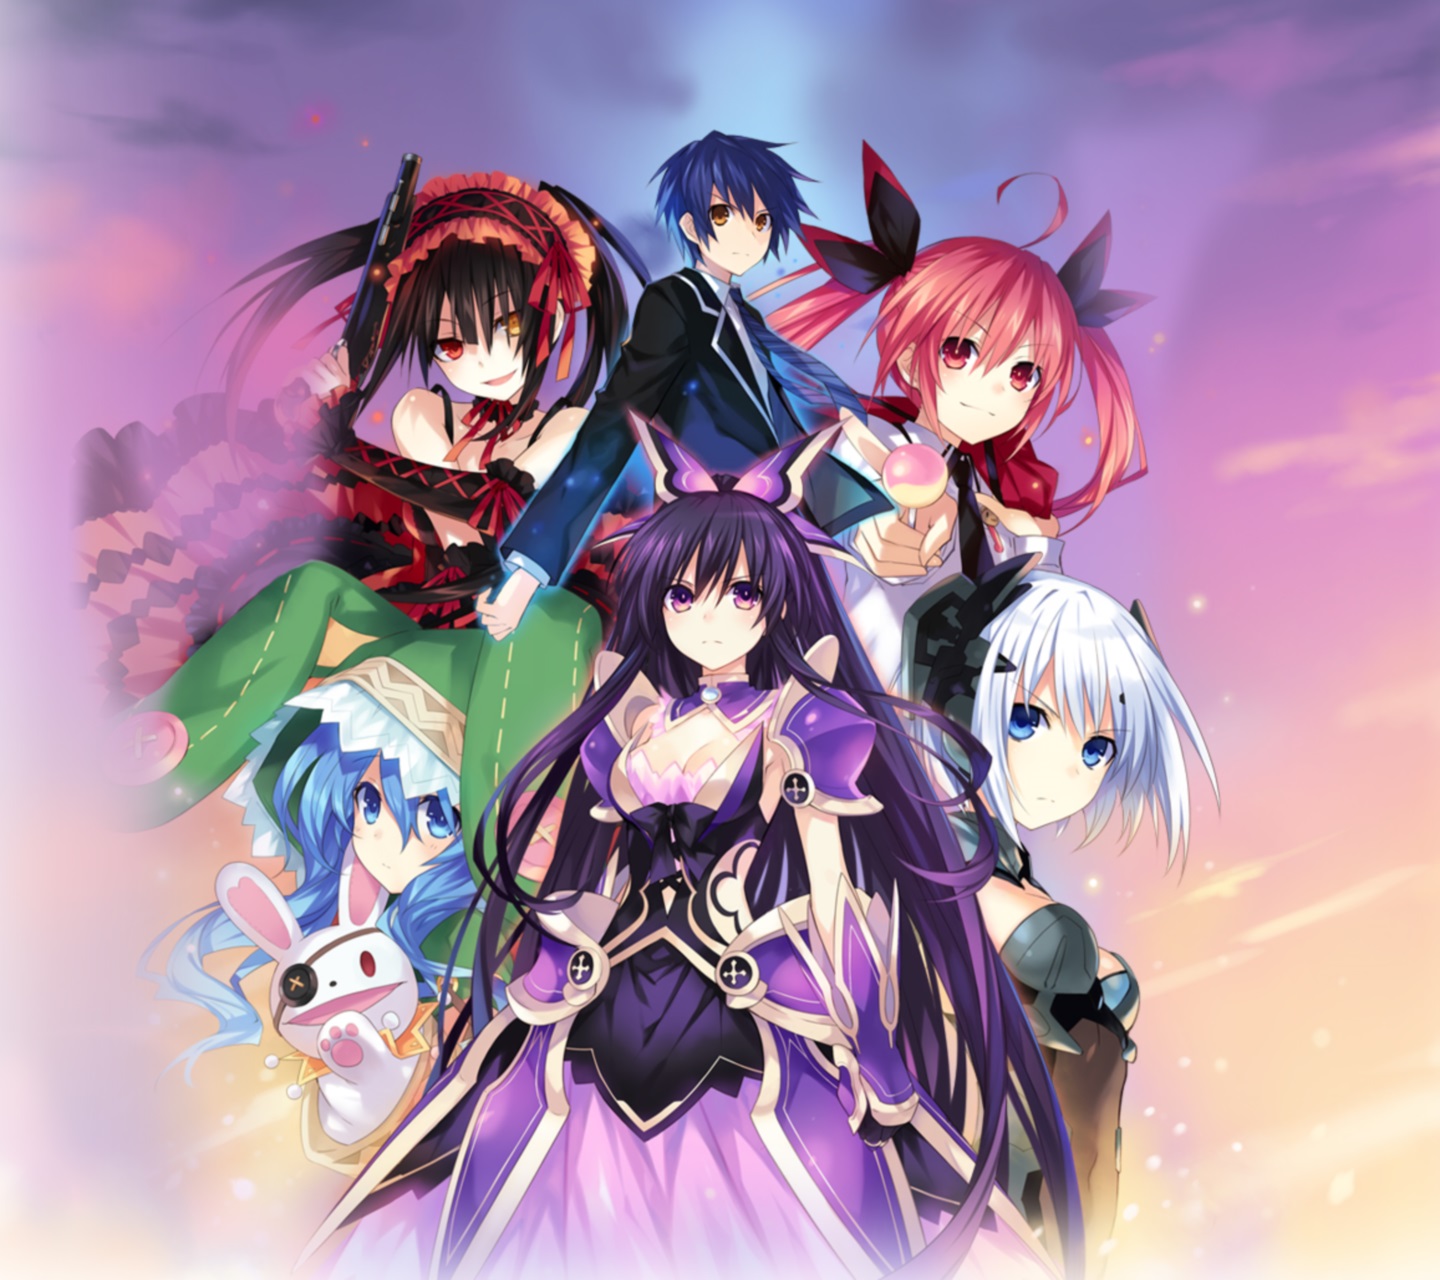 Date a live wallpapers for smartphones iphone android x